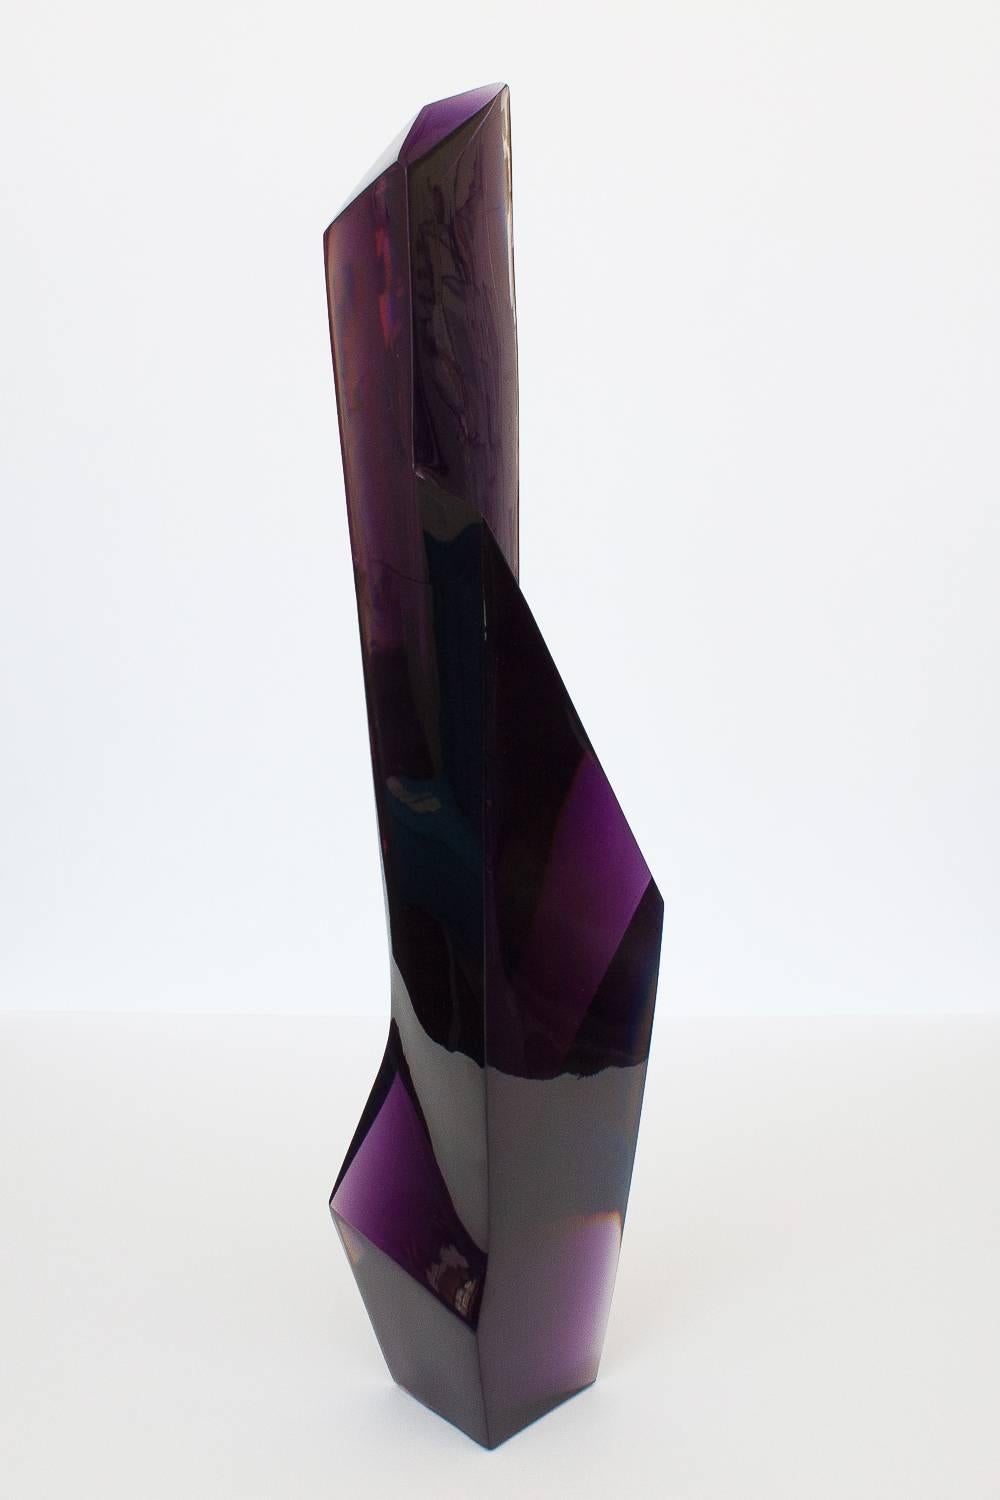 abstract resin sculpture